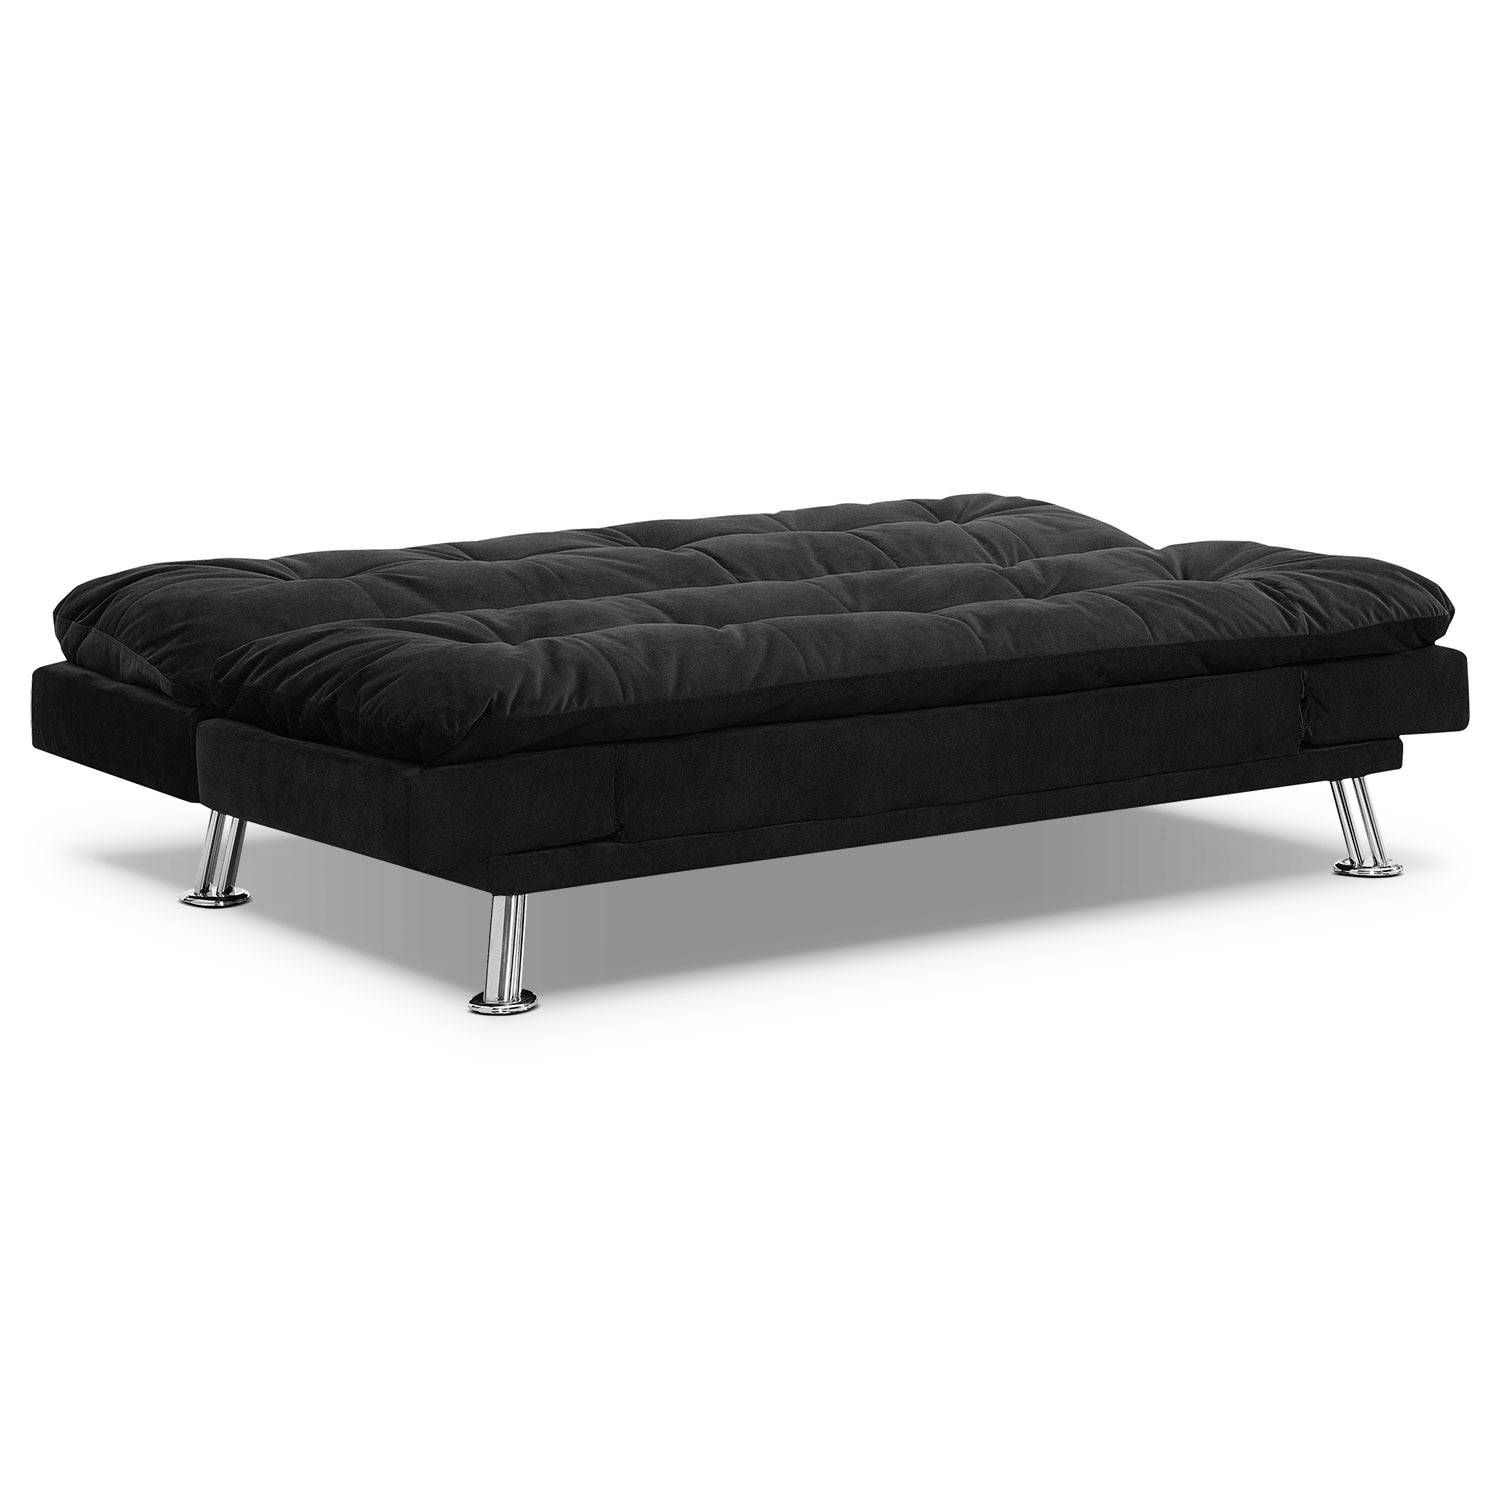 Waltz Futon Sofa Bed – Black | Value City Furniture Intended For Fulton Sofa Beds (View 28 of 30)